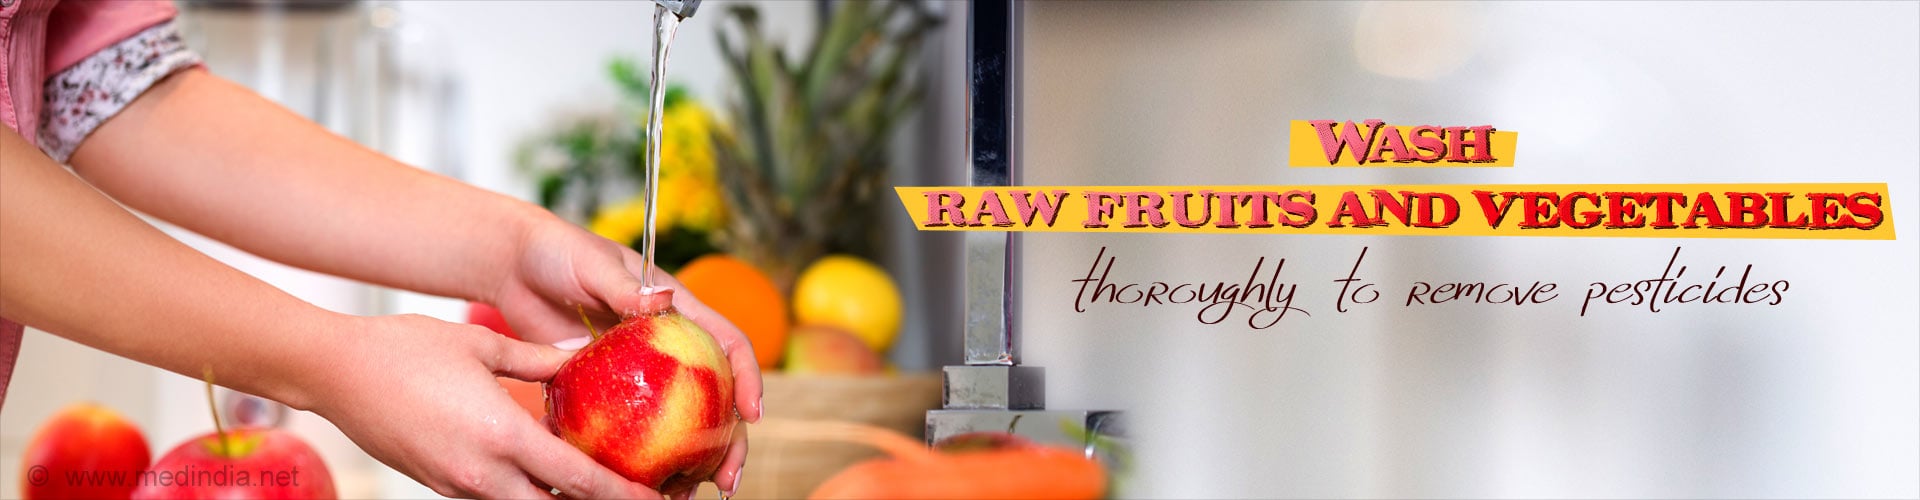 Wash raw fruits and vegetables thoroughly to remove pesticides and prevent intestinal worms